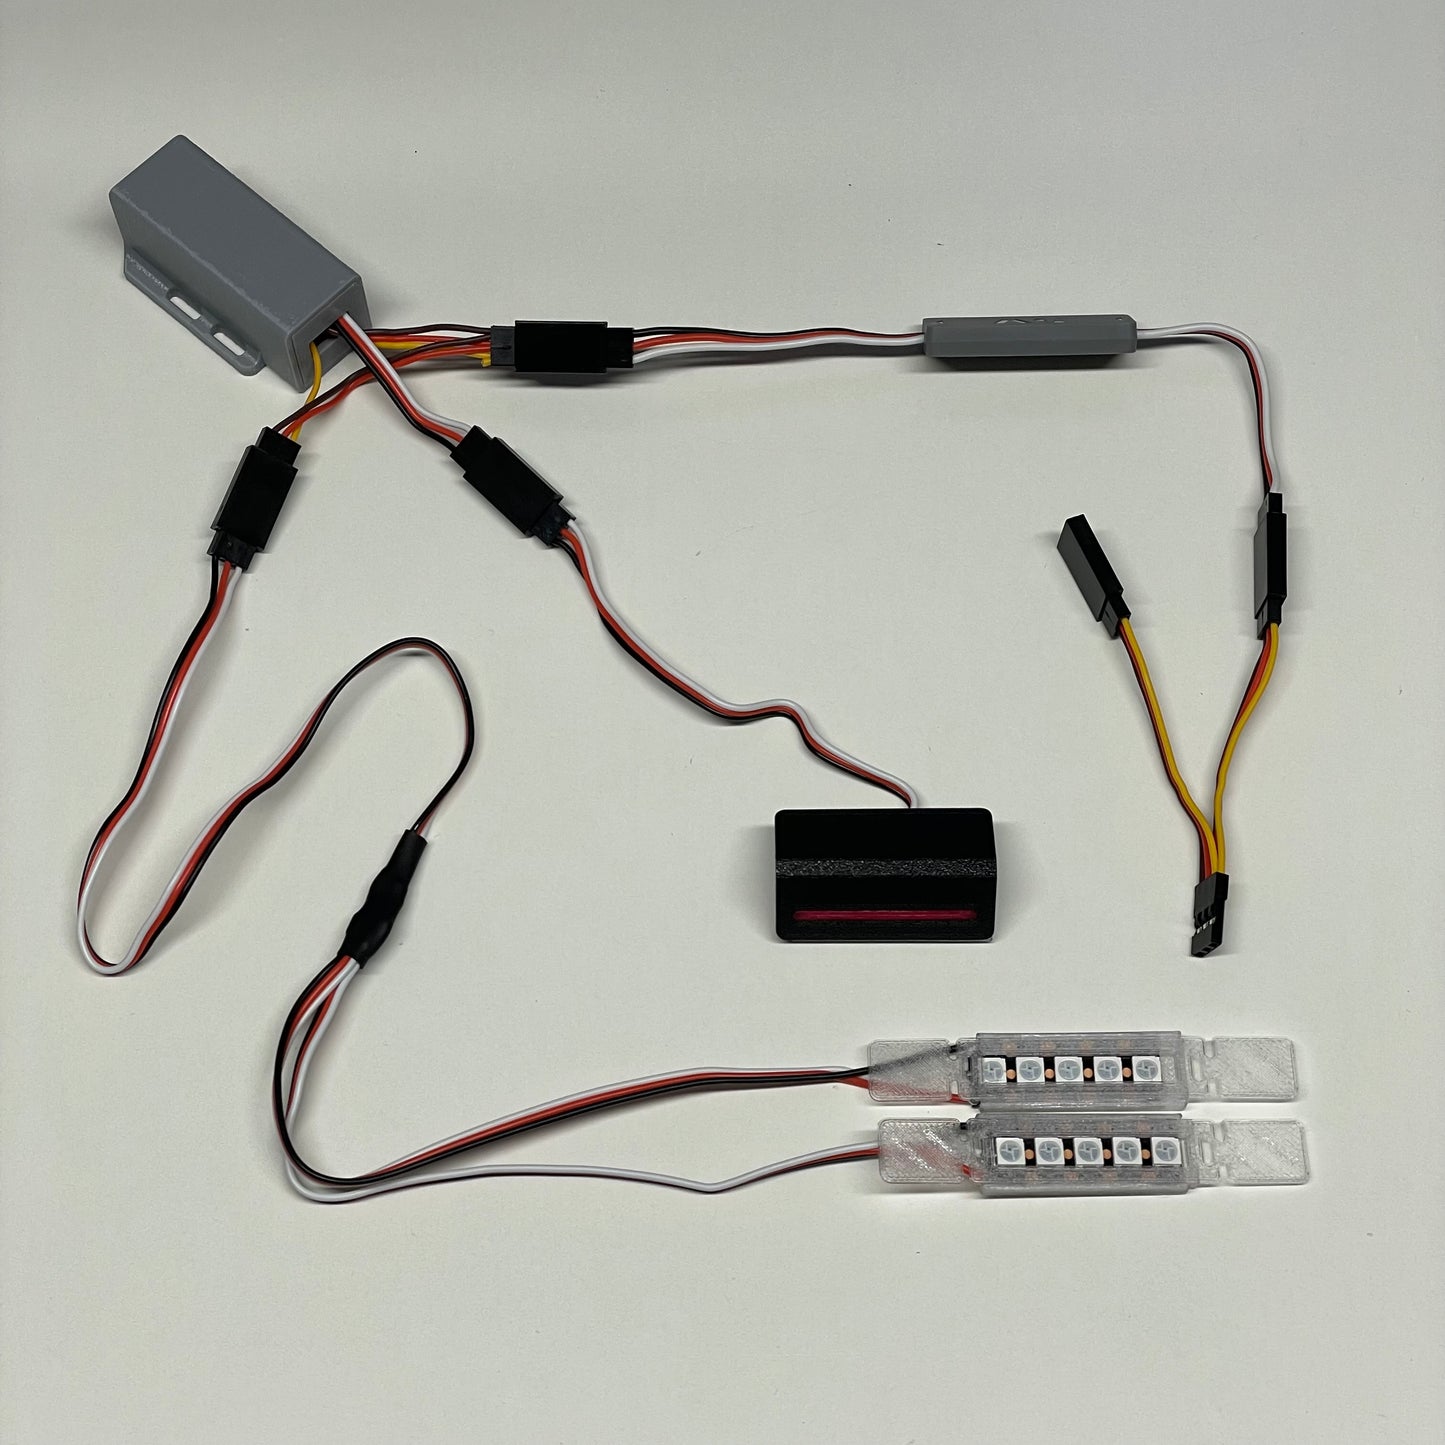 Drift Light System for RC 1/10 Scale Drift Cars Competition